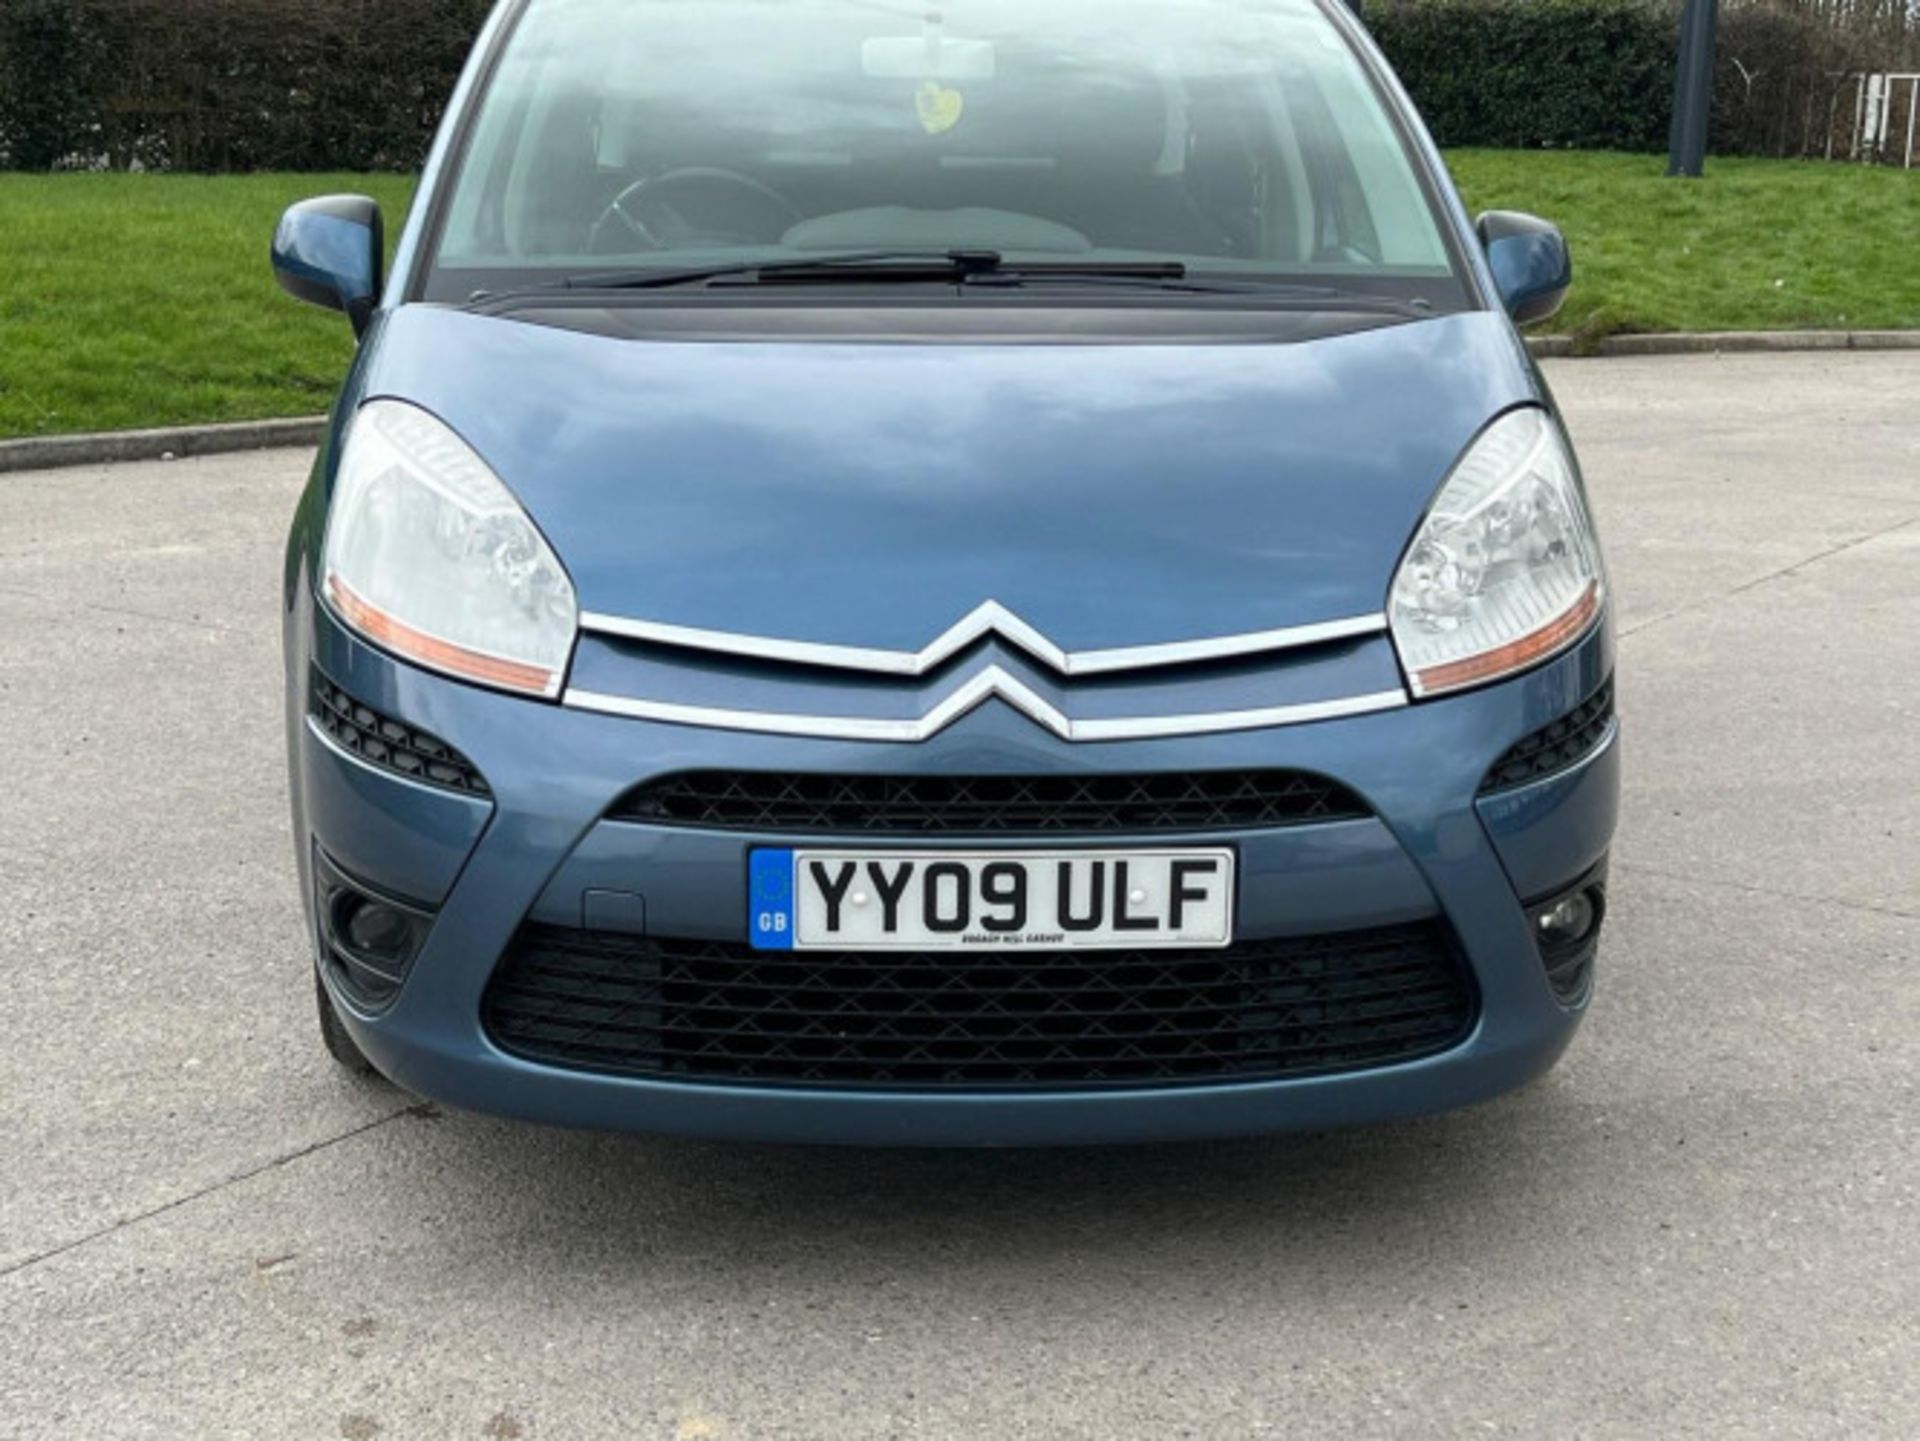 2009 CITROEN C4 PICASSO 1.6 HDI VTR+ EGS6 5DR >>--NO VAT ON HAMMER--<< - Image 108 of 123